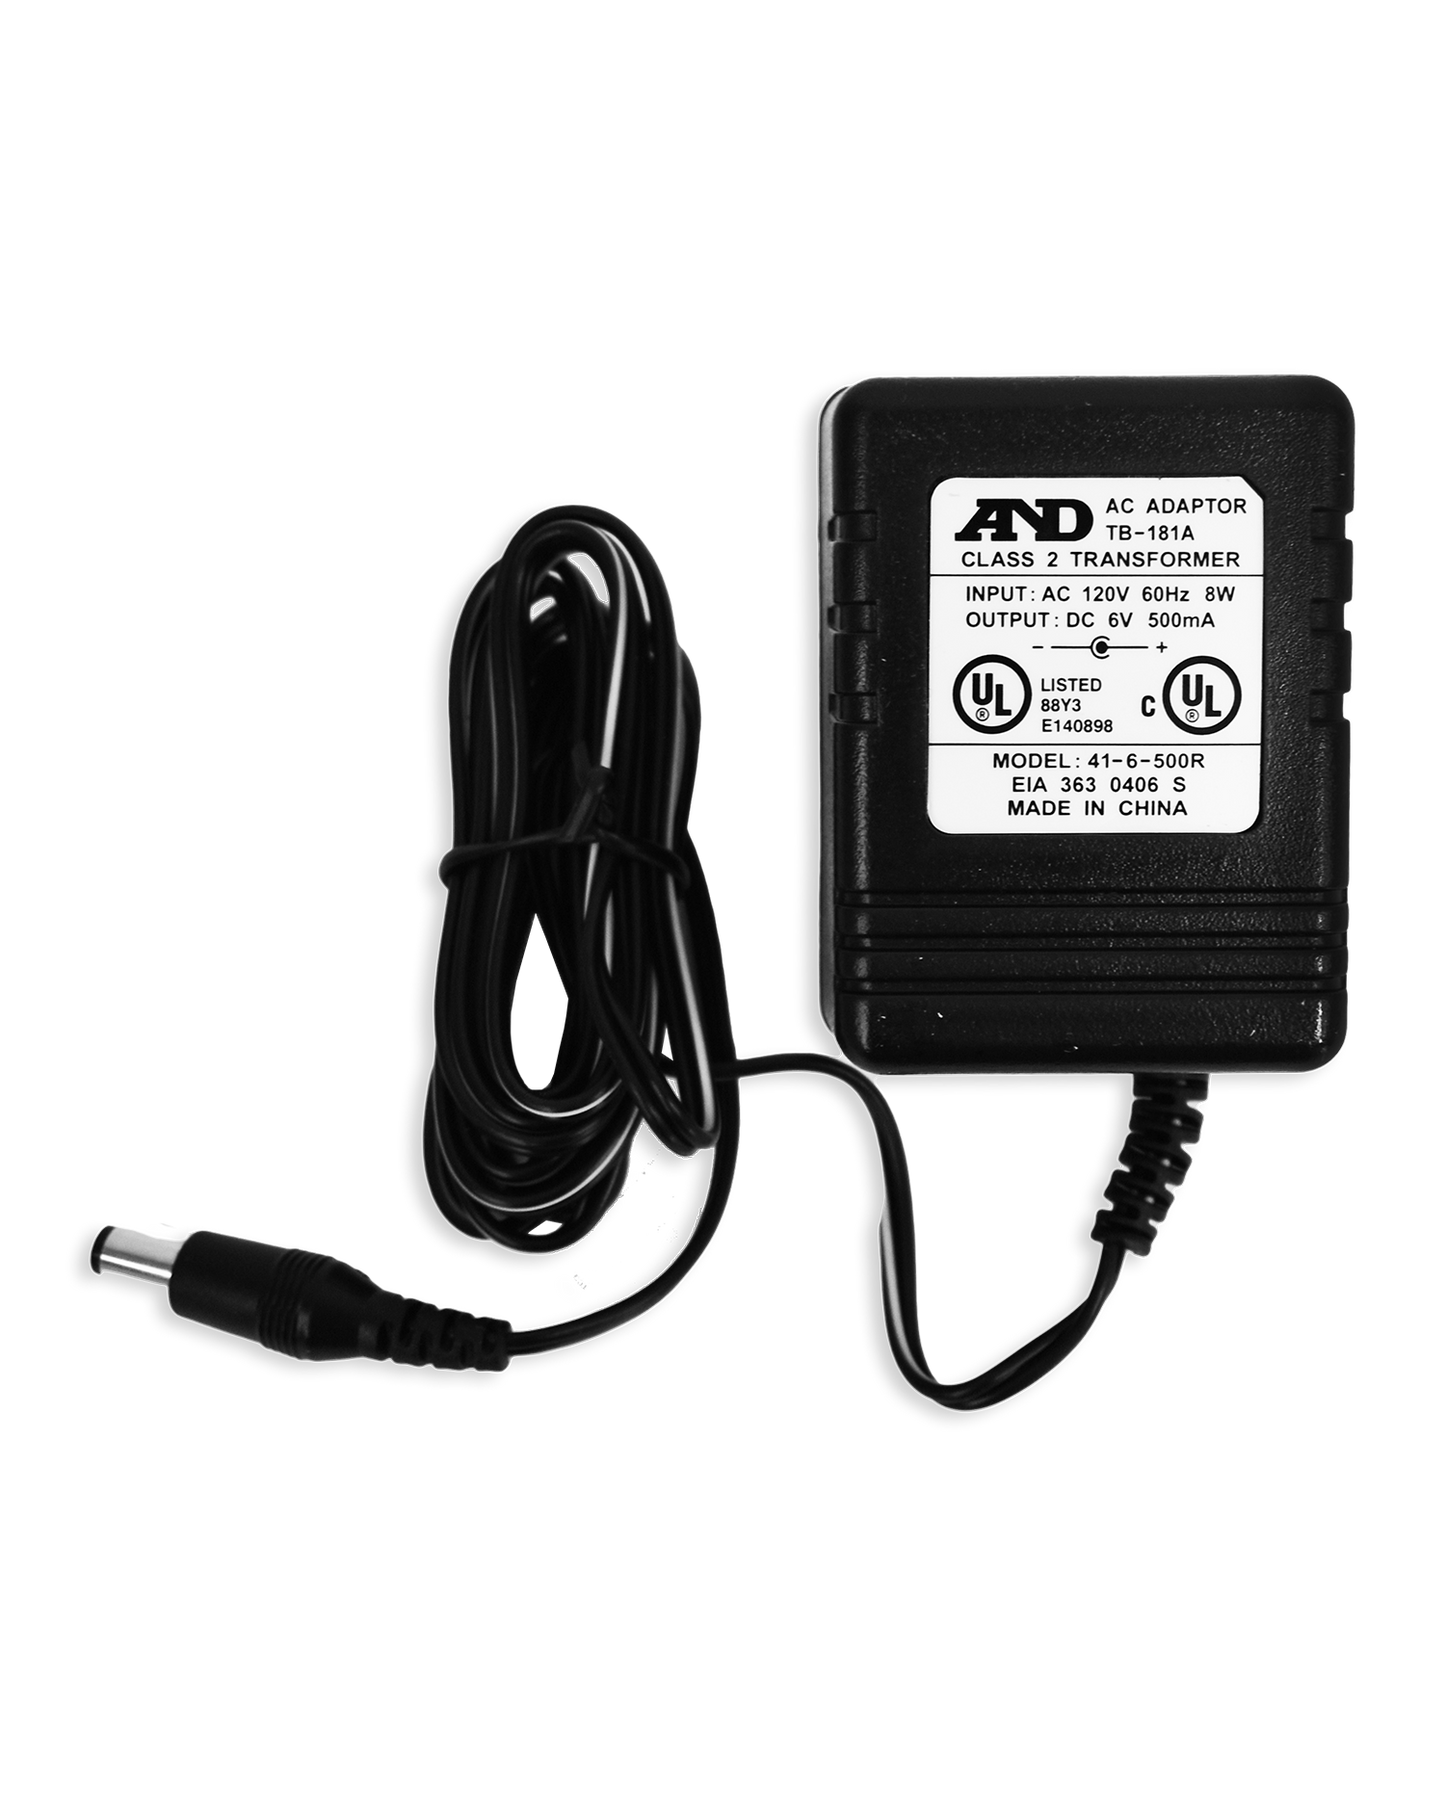 A&D Medical AC Adapter for Blood Pressure Monitors